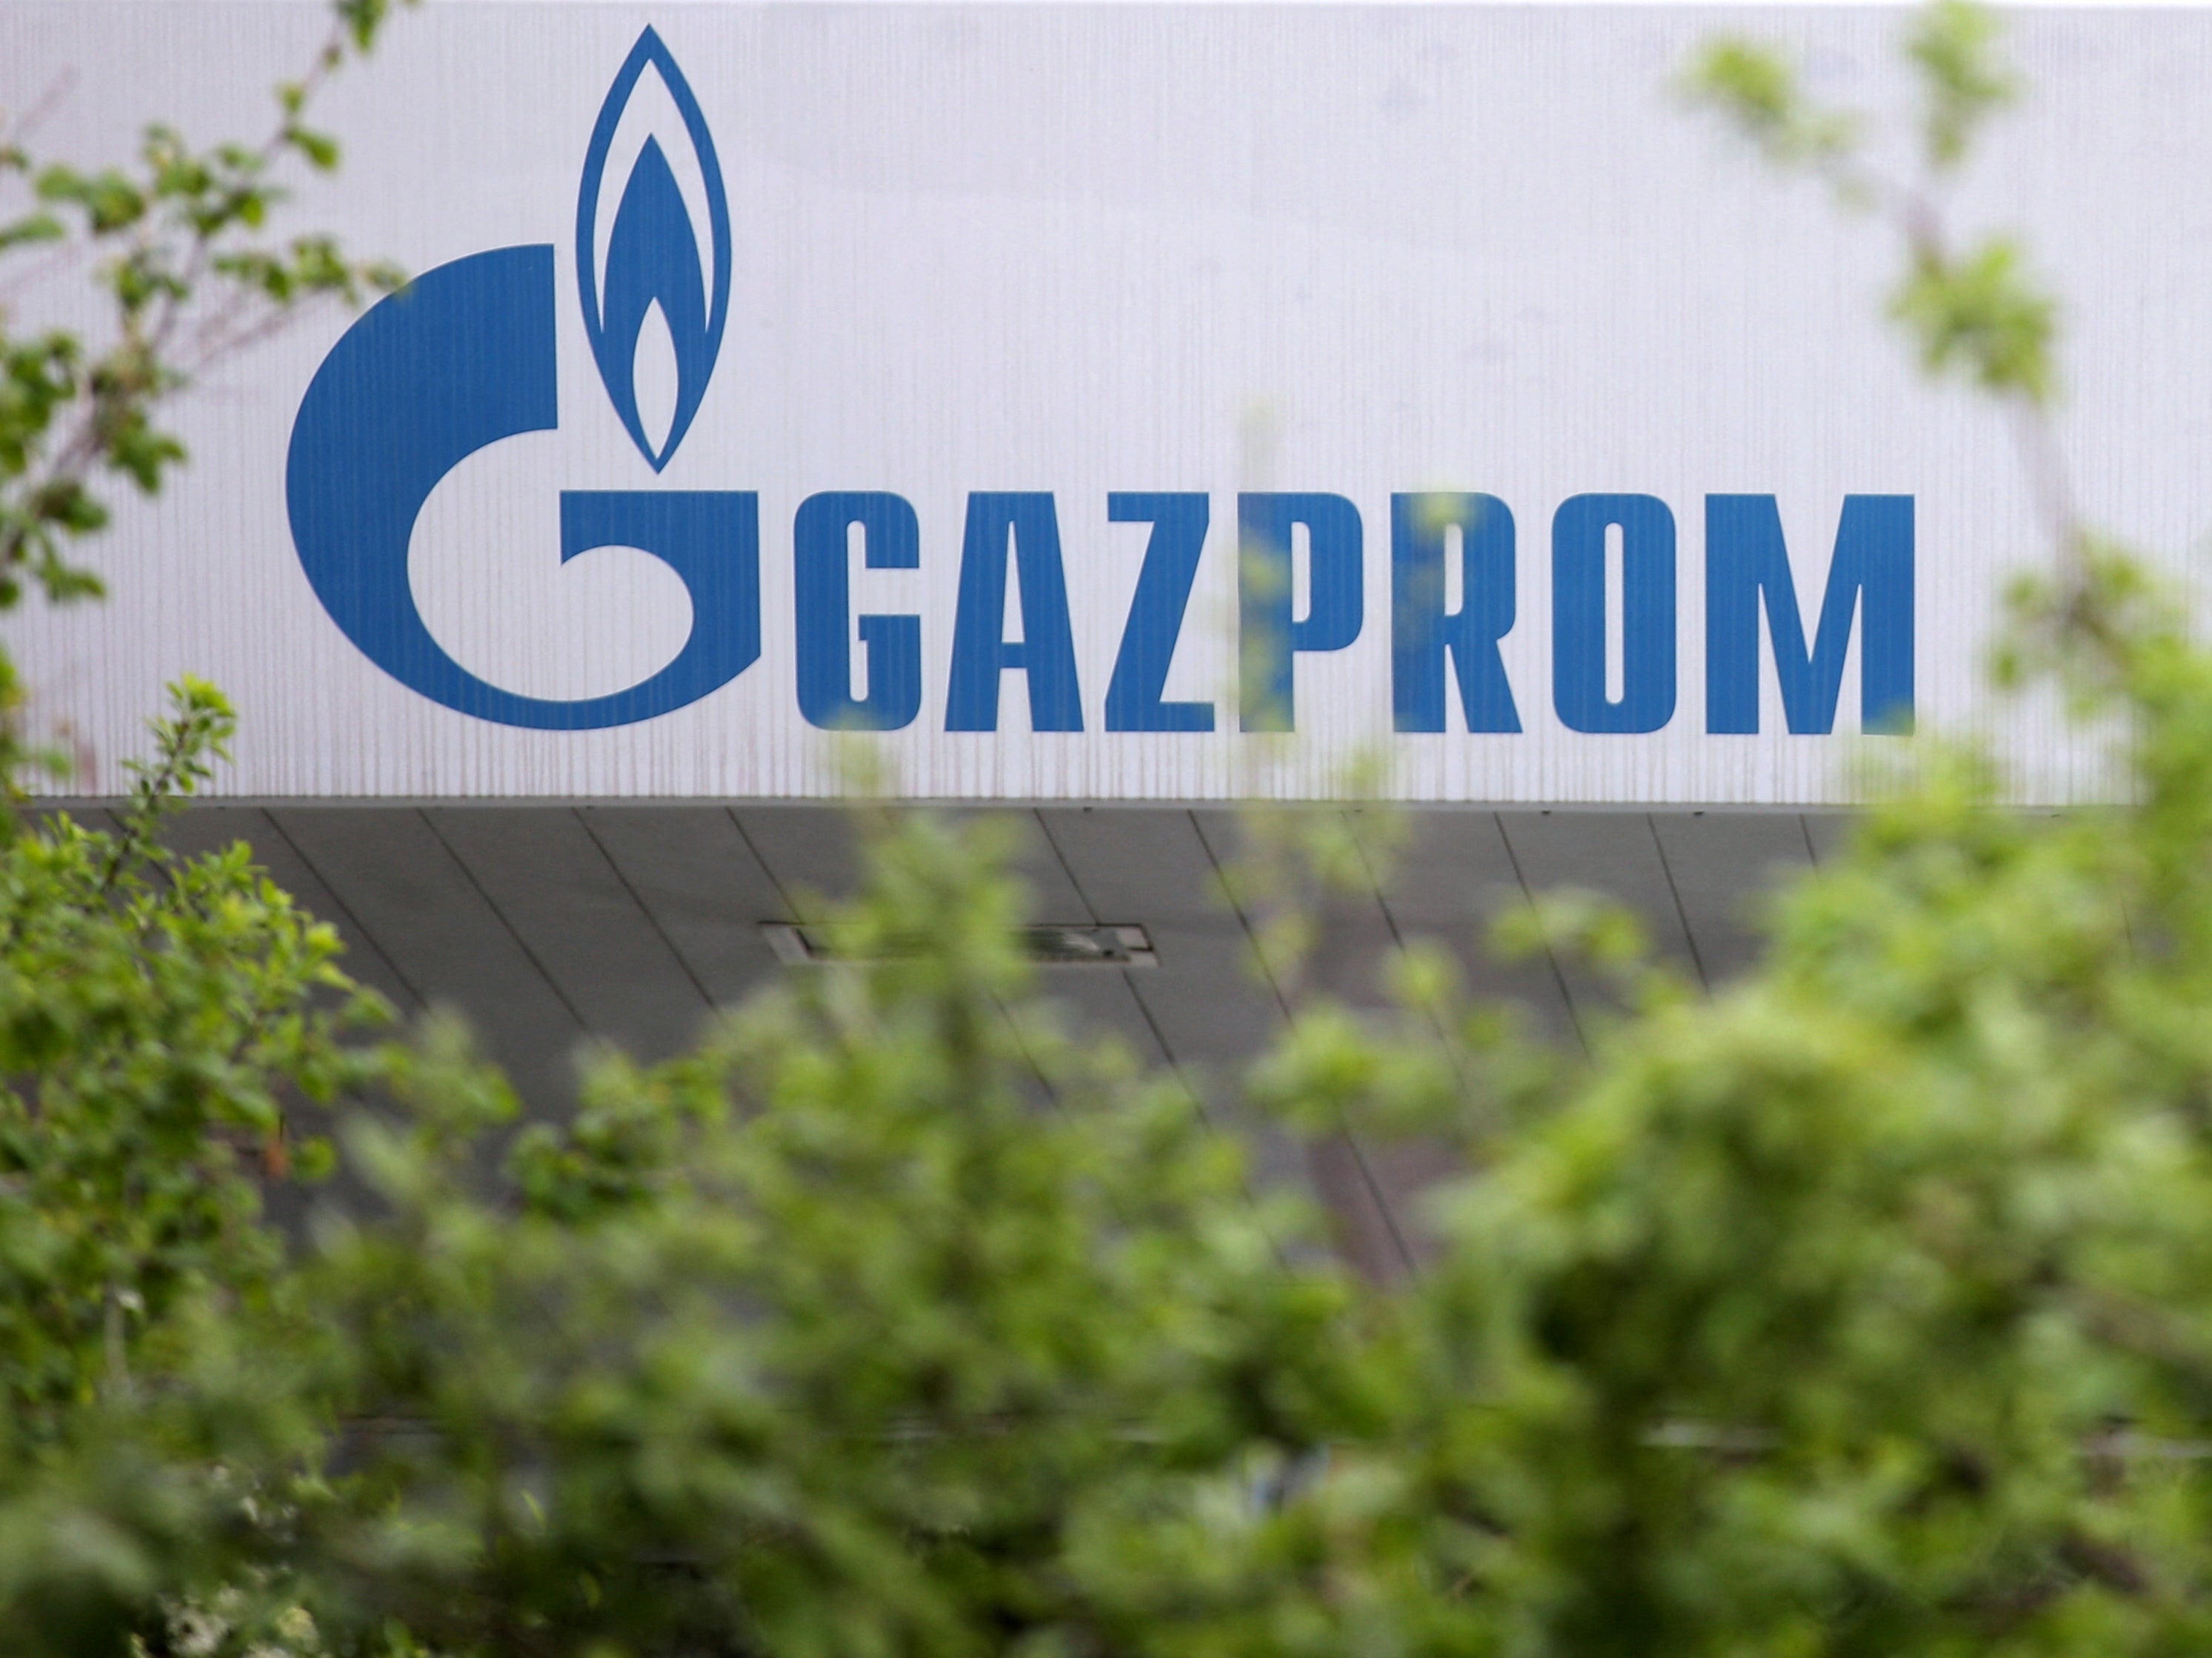 Gazprombank is not subject to sanctions by the EU, and operating in Switzerland is facilitating rouble payments to Russia for gas for EU countries